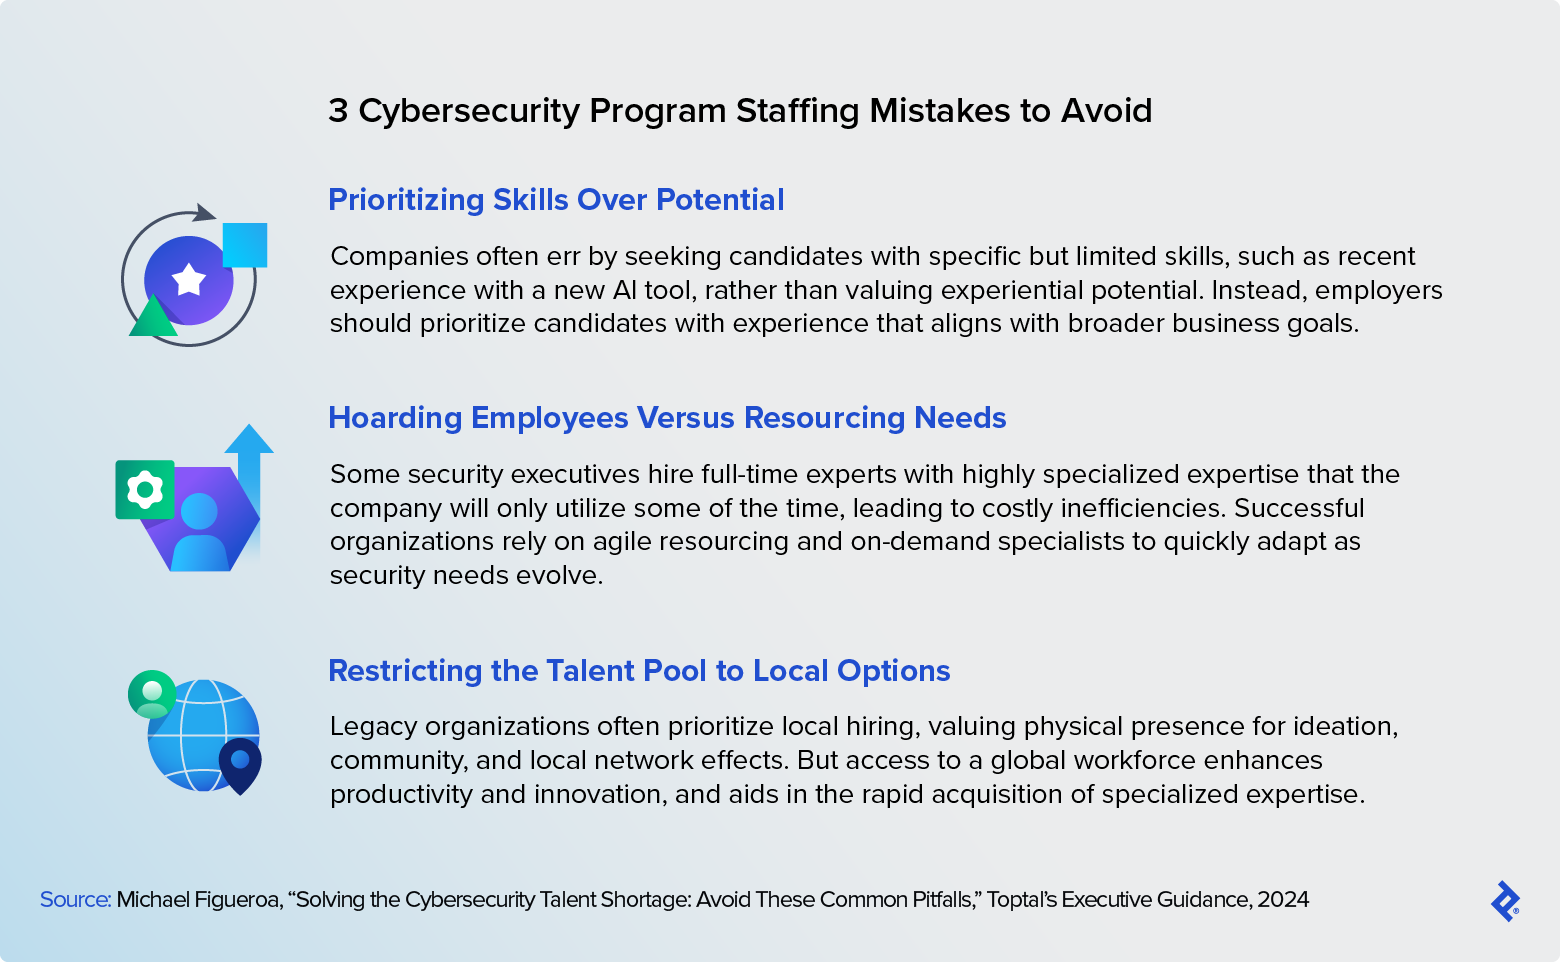 Three security program staffing mistakes to avoid include prioritizing skills over potential, hiring full-time instead of on-demand, and restricting the talent pool to local options.